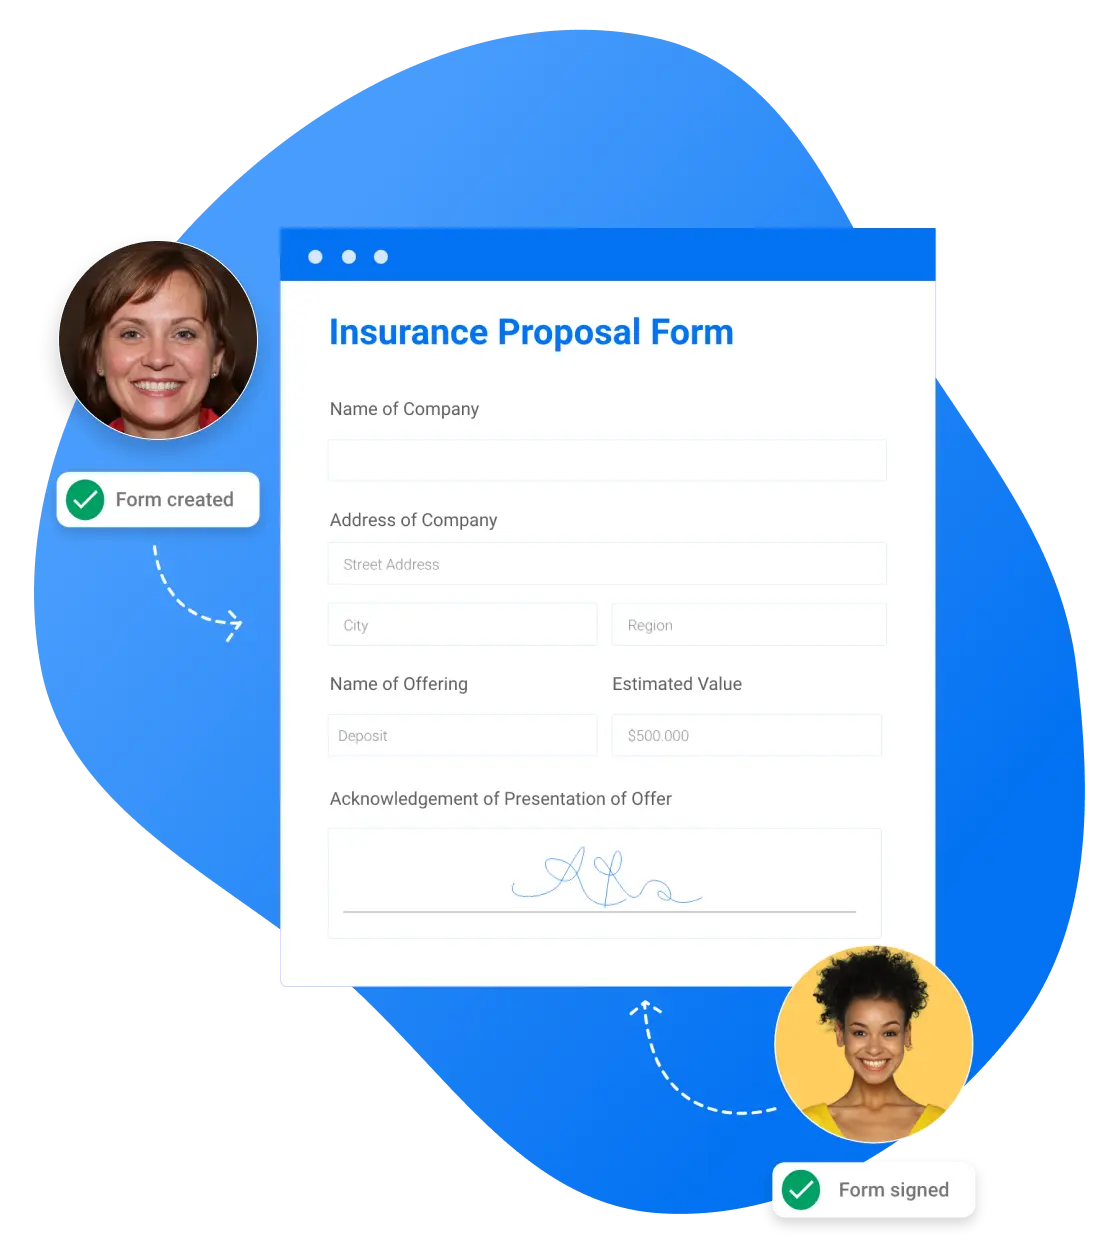 Image showing an insurance proposal form digitally signed